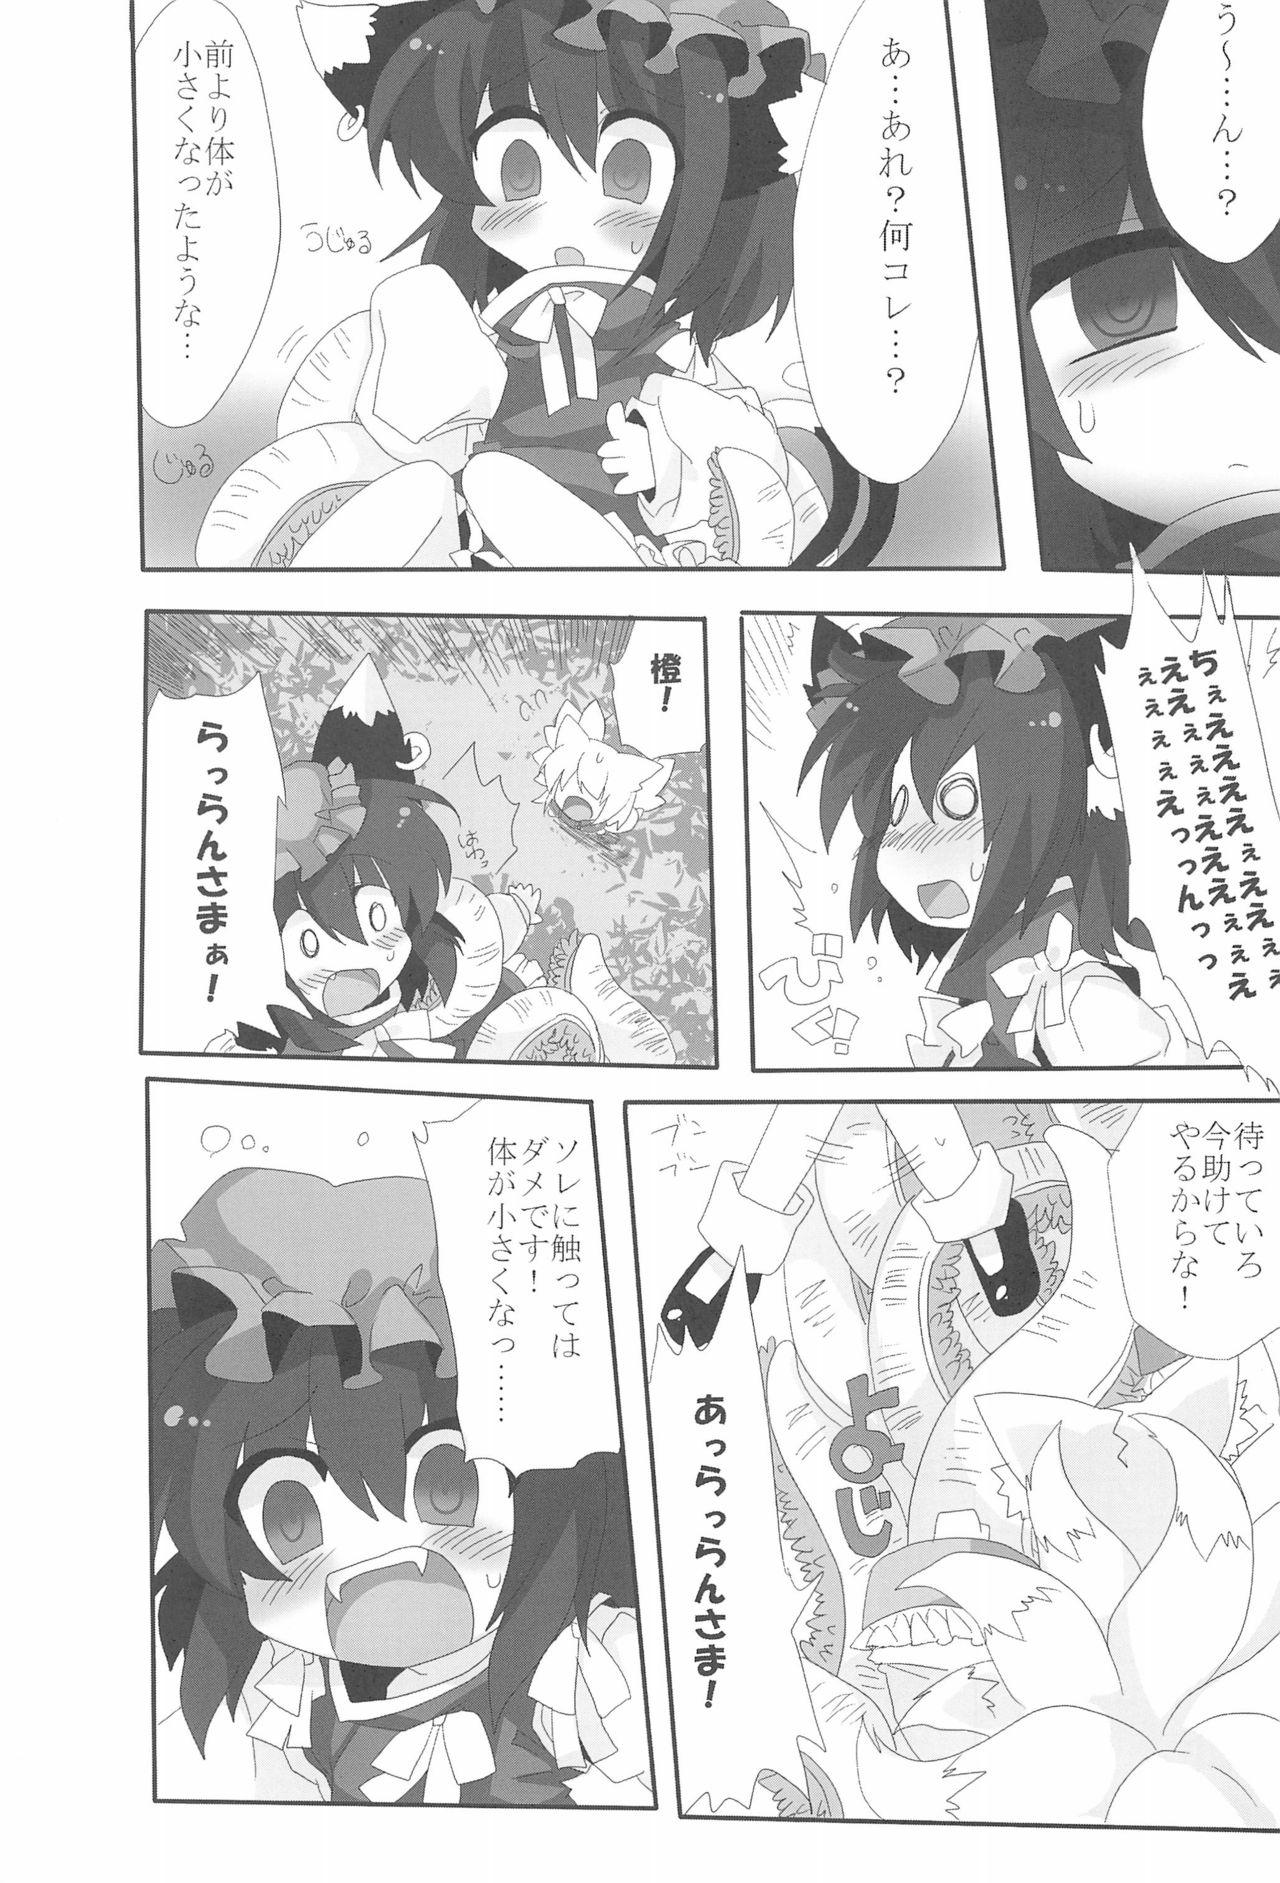 Pene NYAS! ATTRACTION - Touhou project Caseiro - Page 7